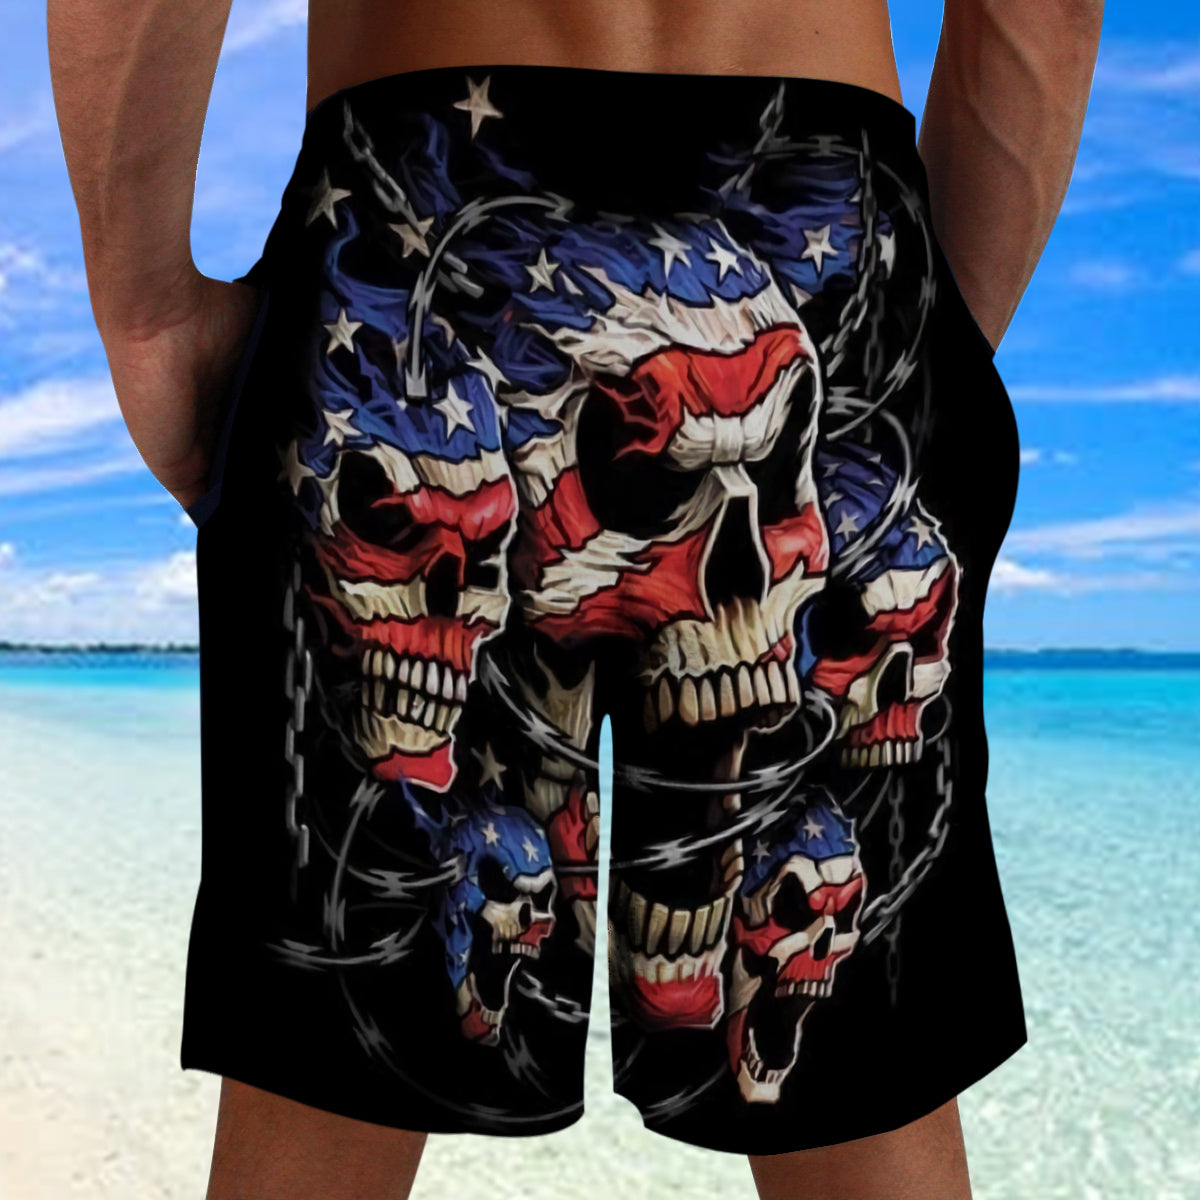 Skull With American Flag Shorts 09100